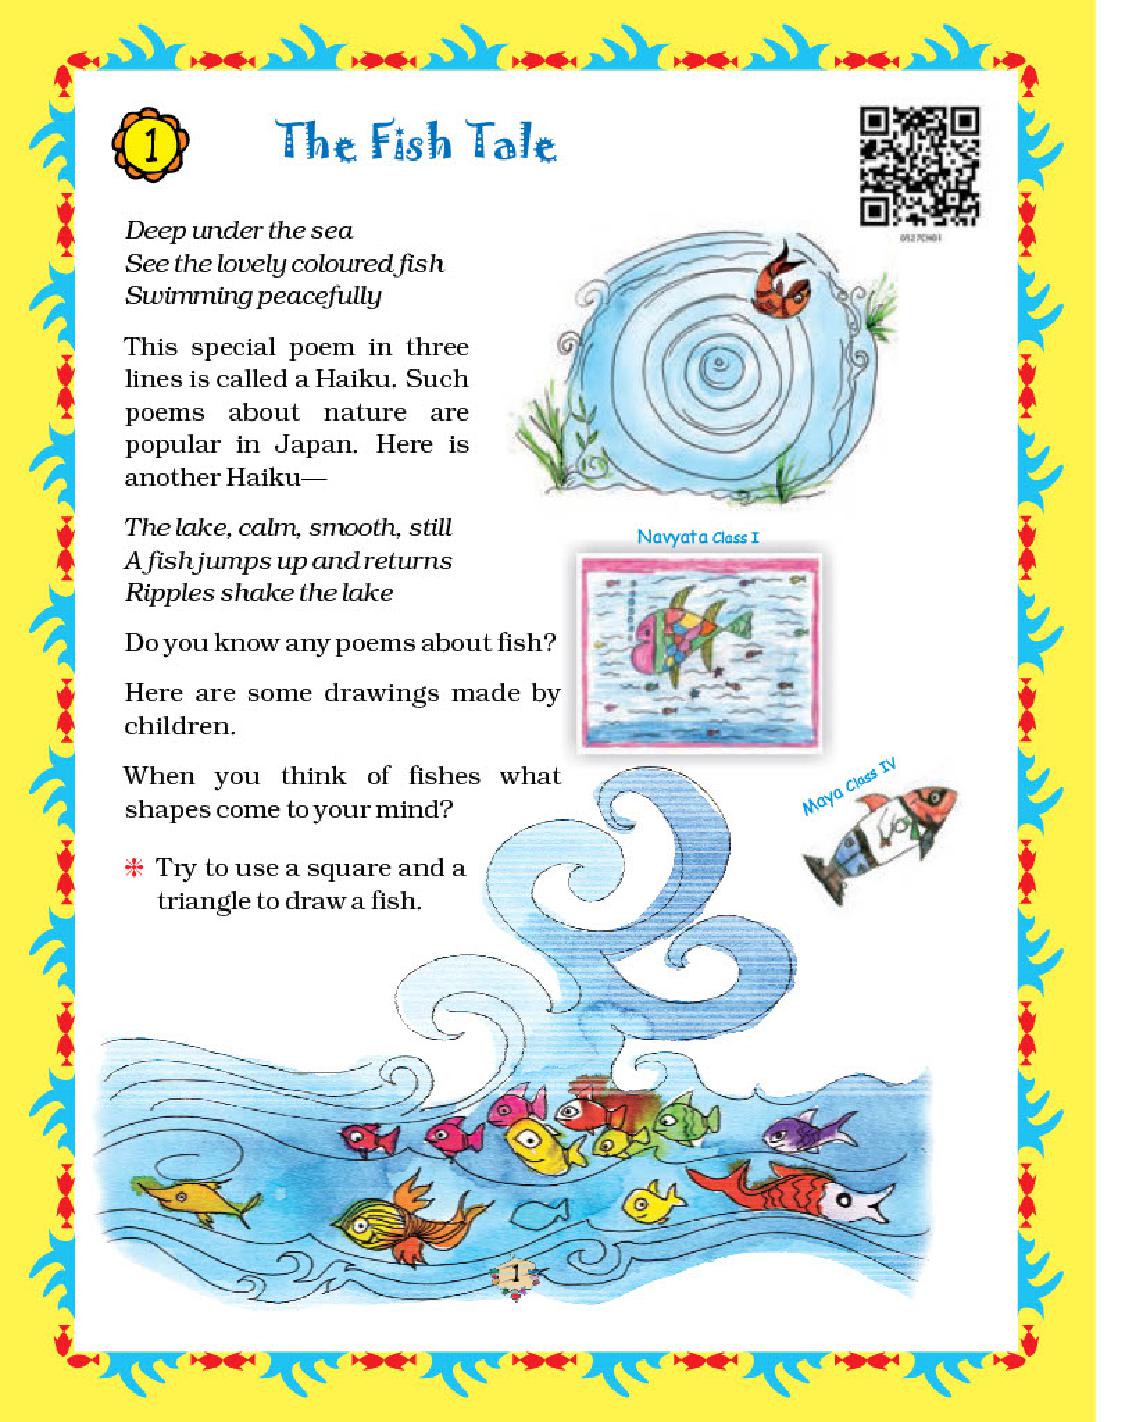 NCERT Book Class 5 Maths Chapter 1 The Fish Tale - Page 1